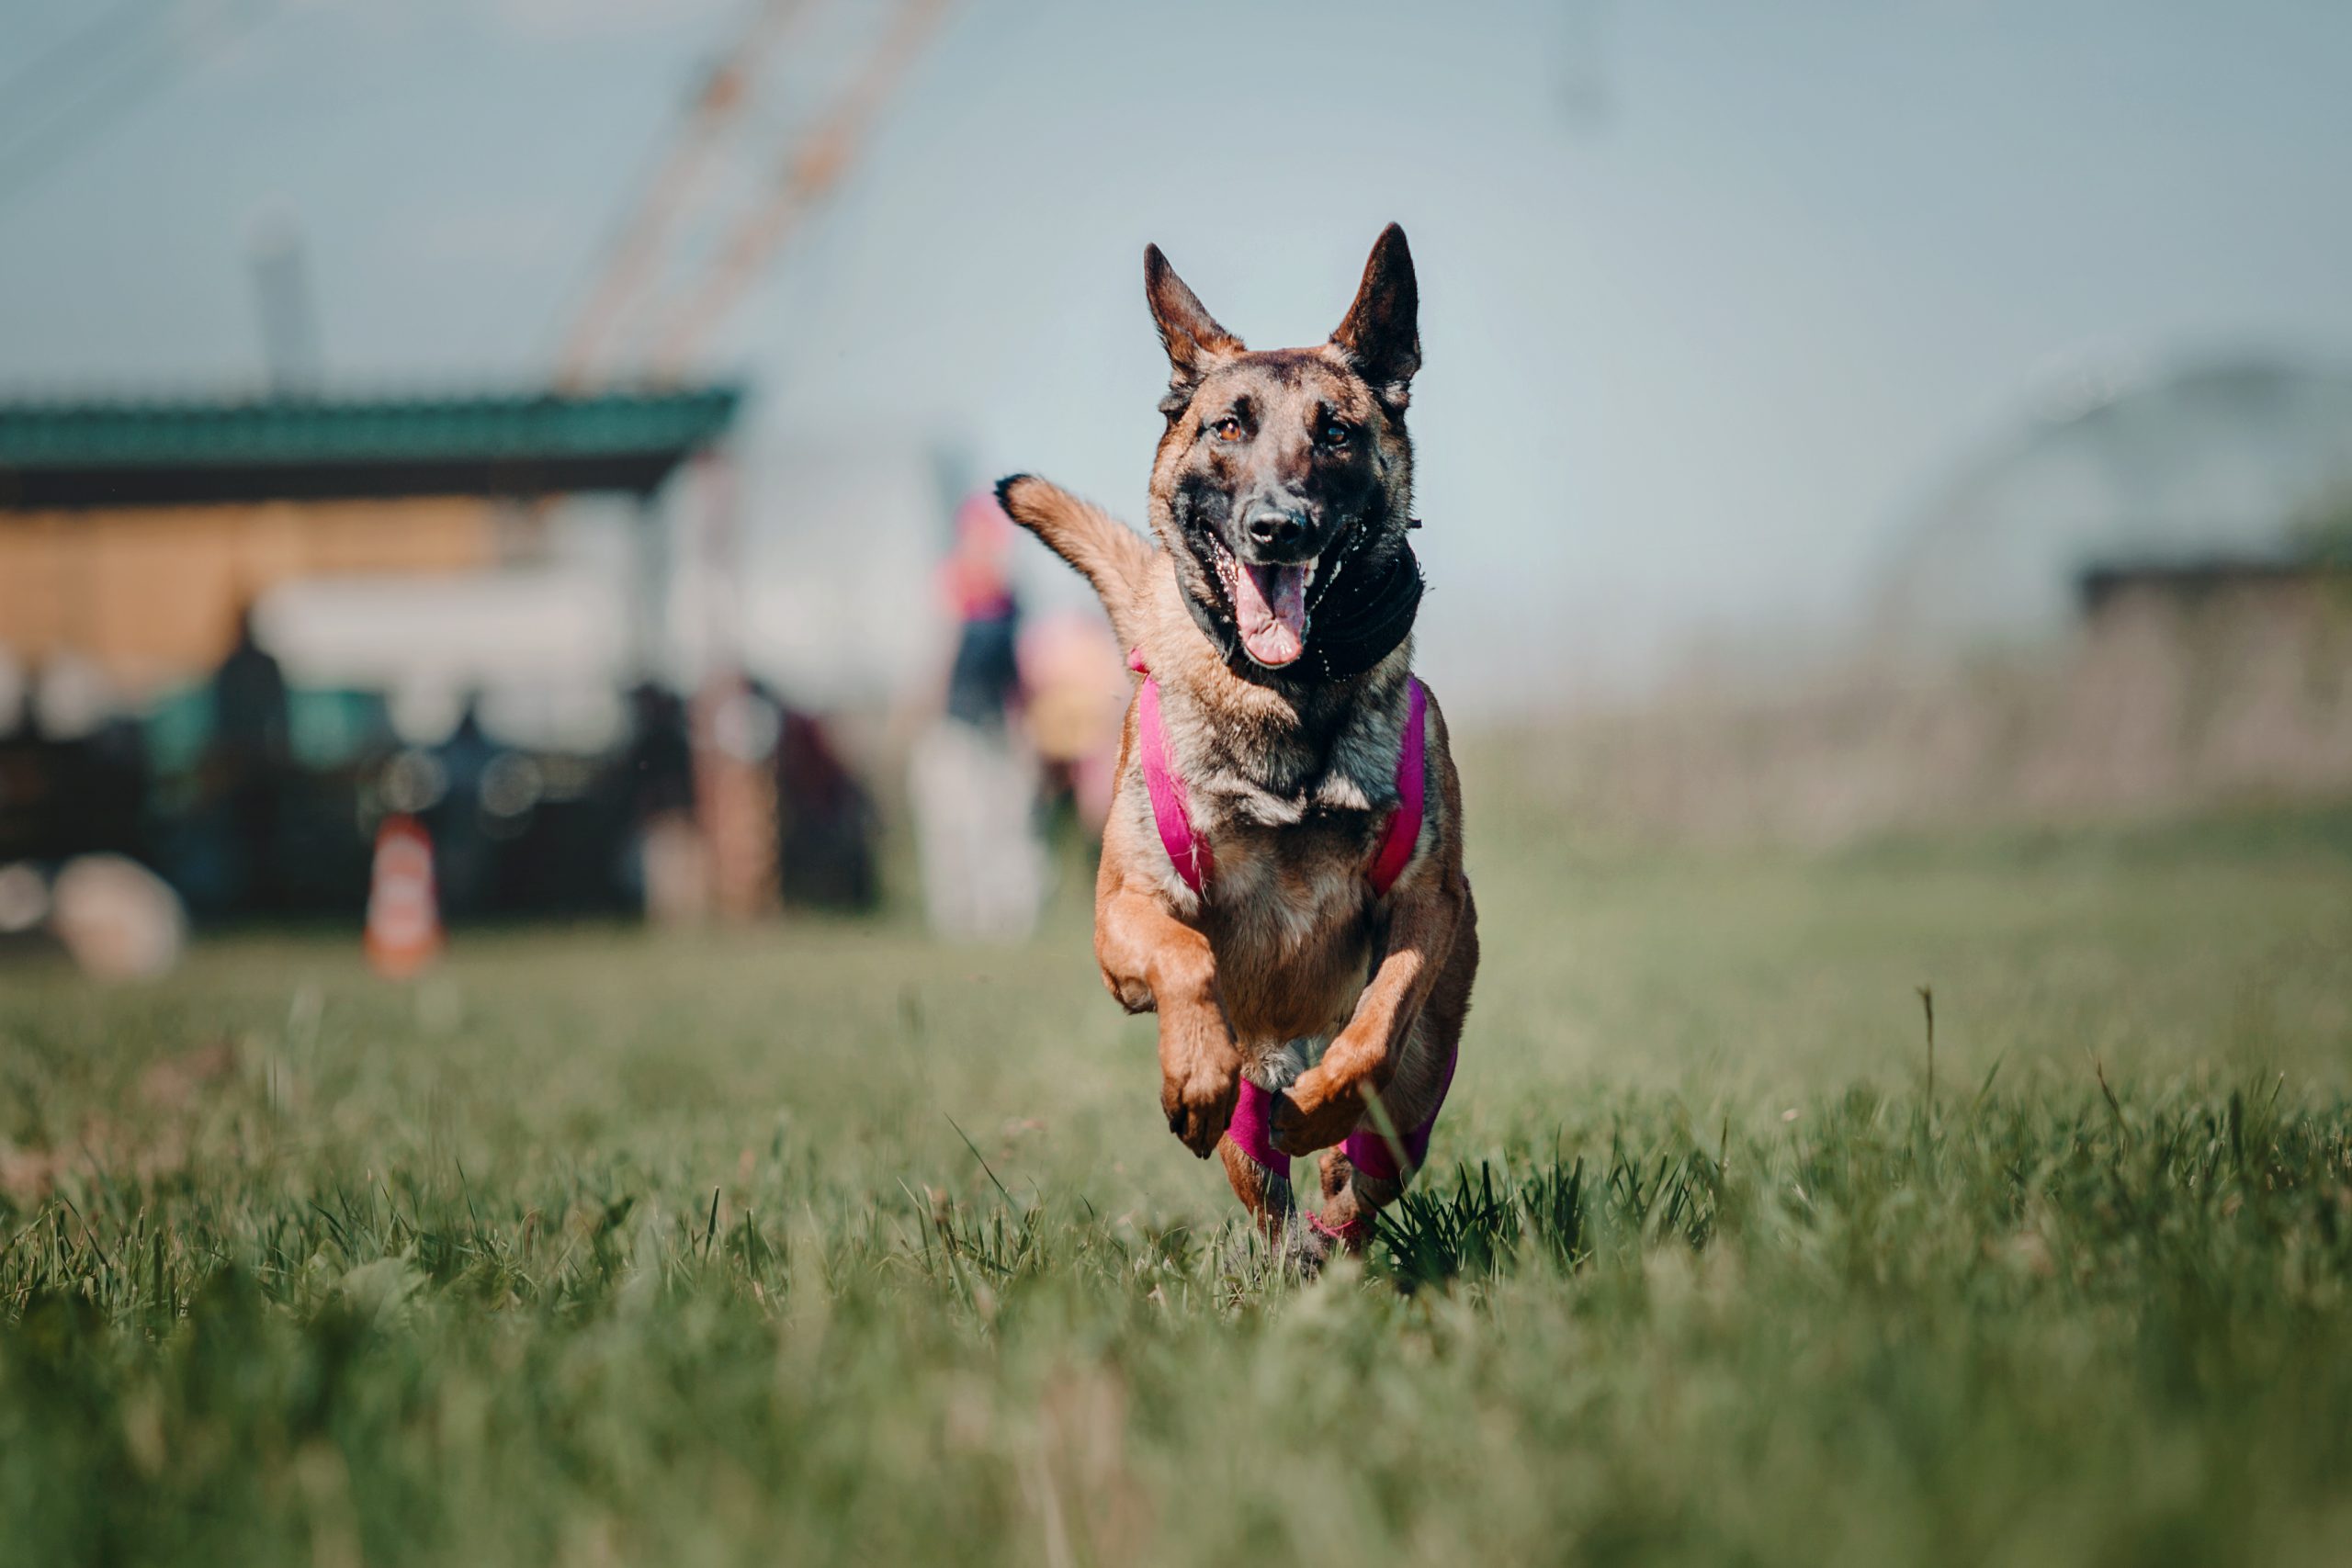 The 5 Best Dog Training Courses For Service Dogs